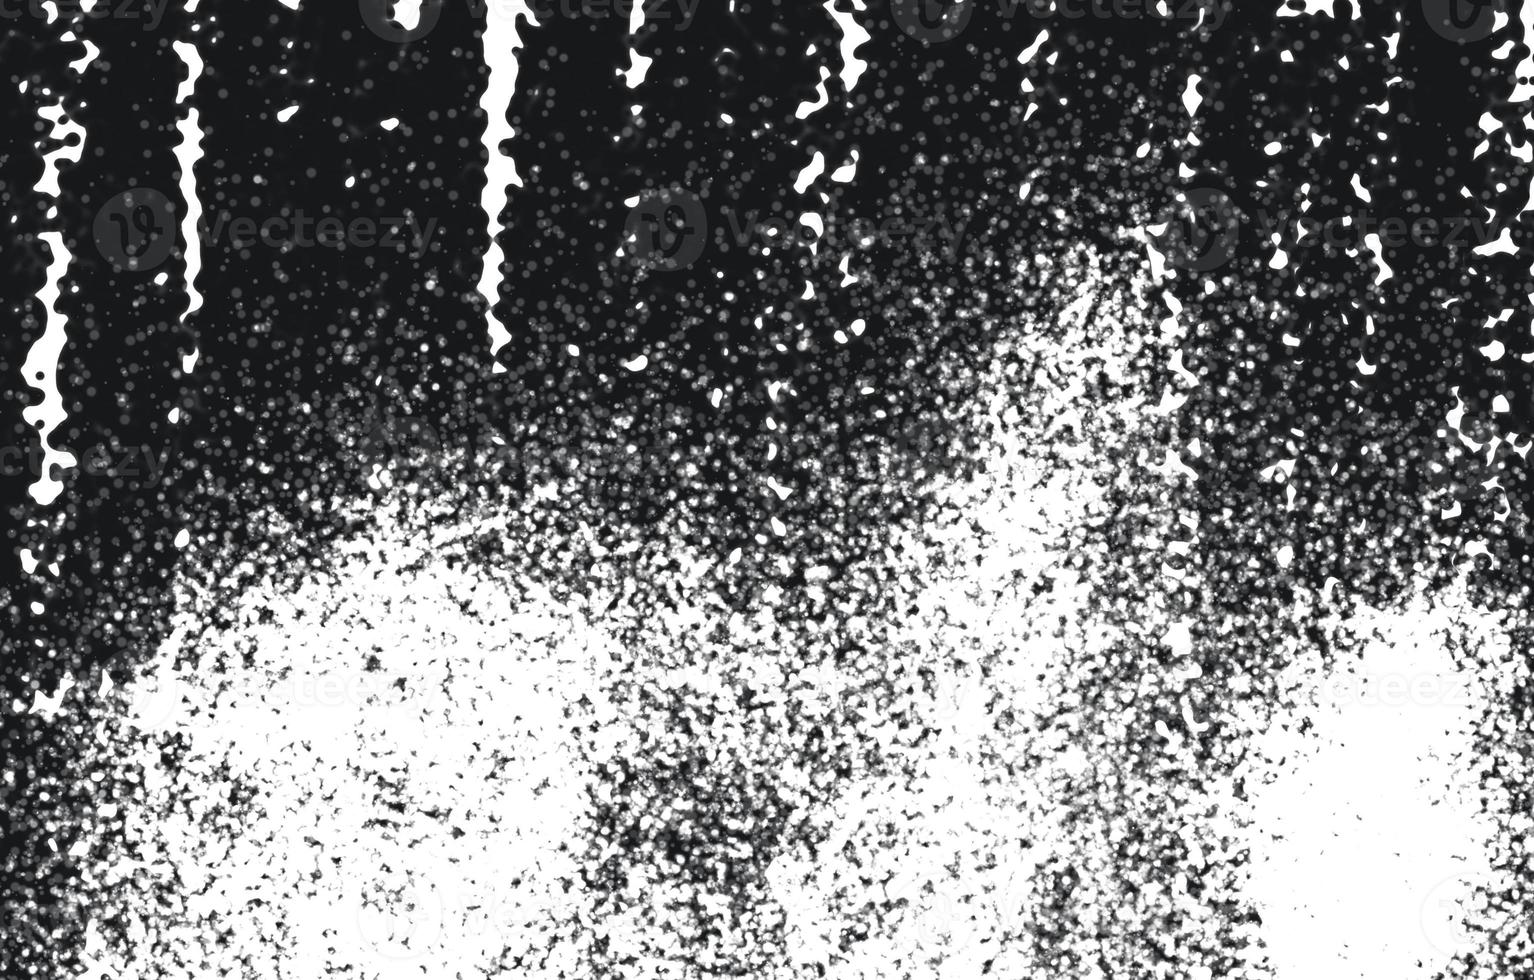 Grunge black and white texture.Overlay illustration over any design to create grungy vintage effect and depth. For posters, banners, retro and urban designs. photo